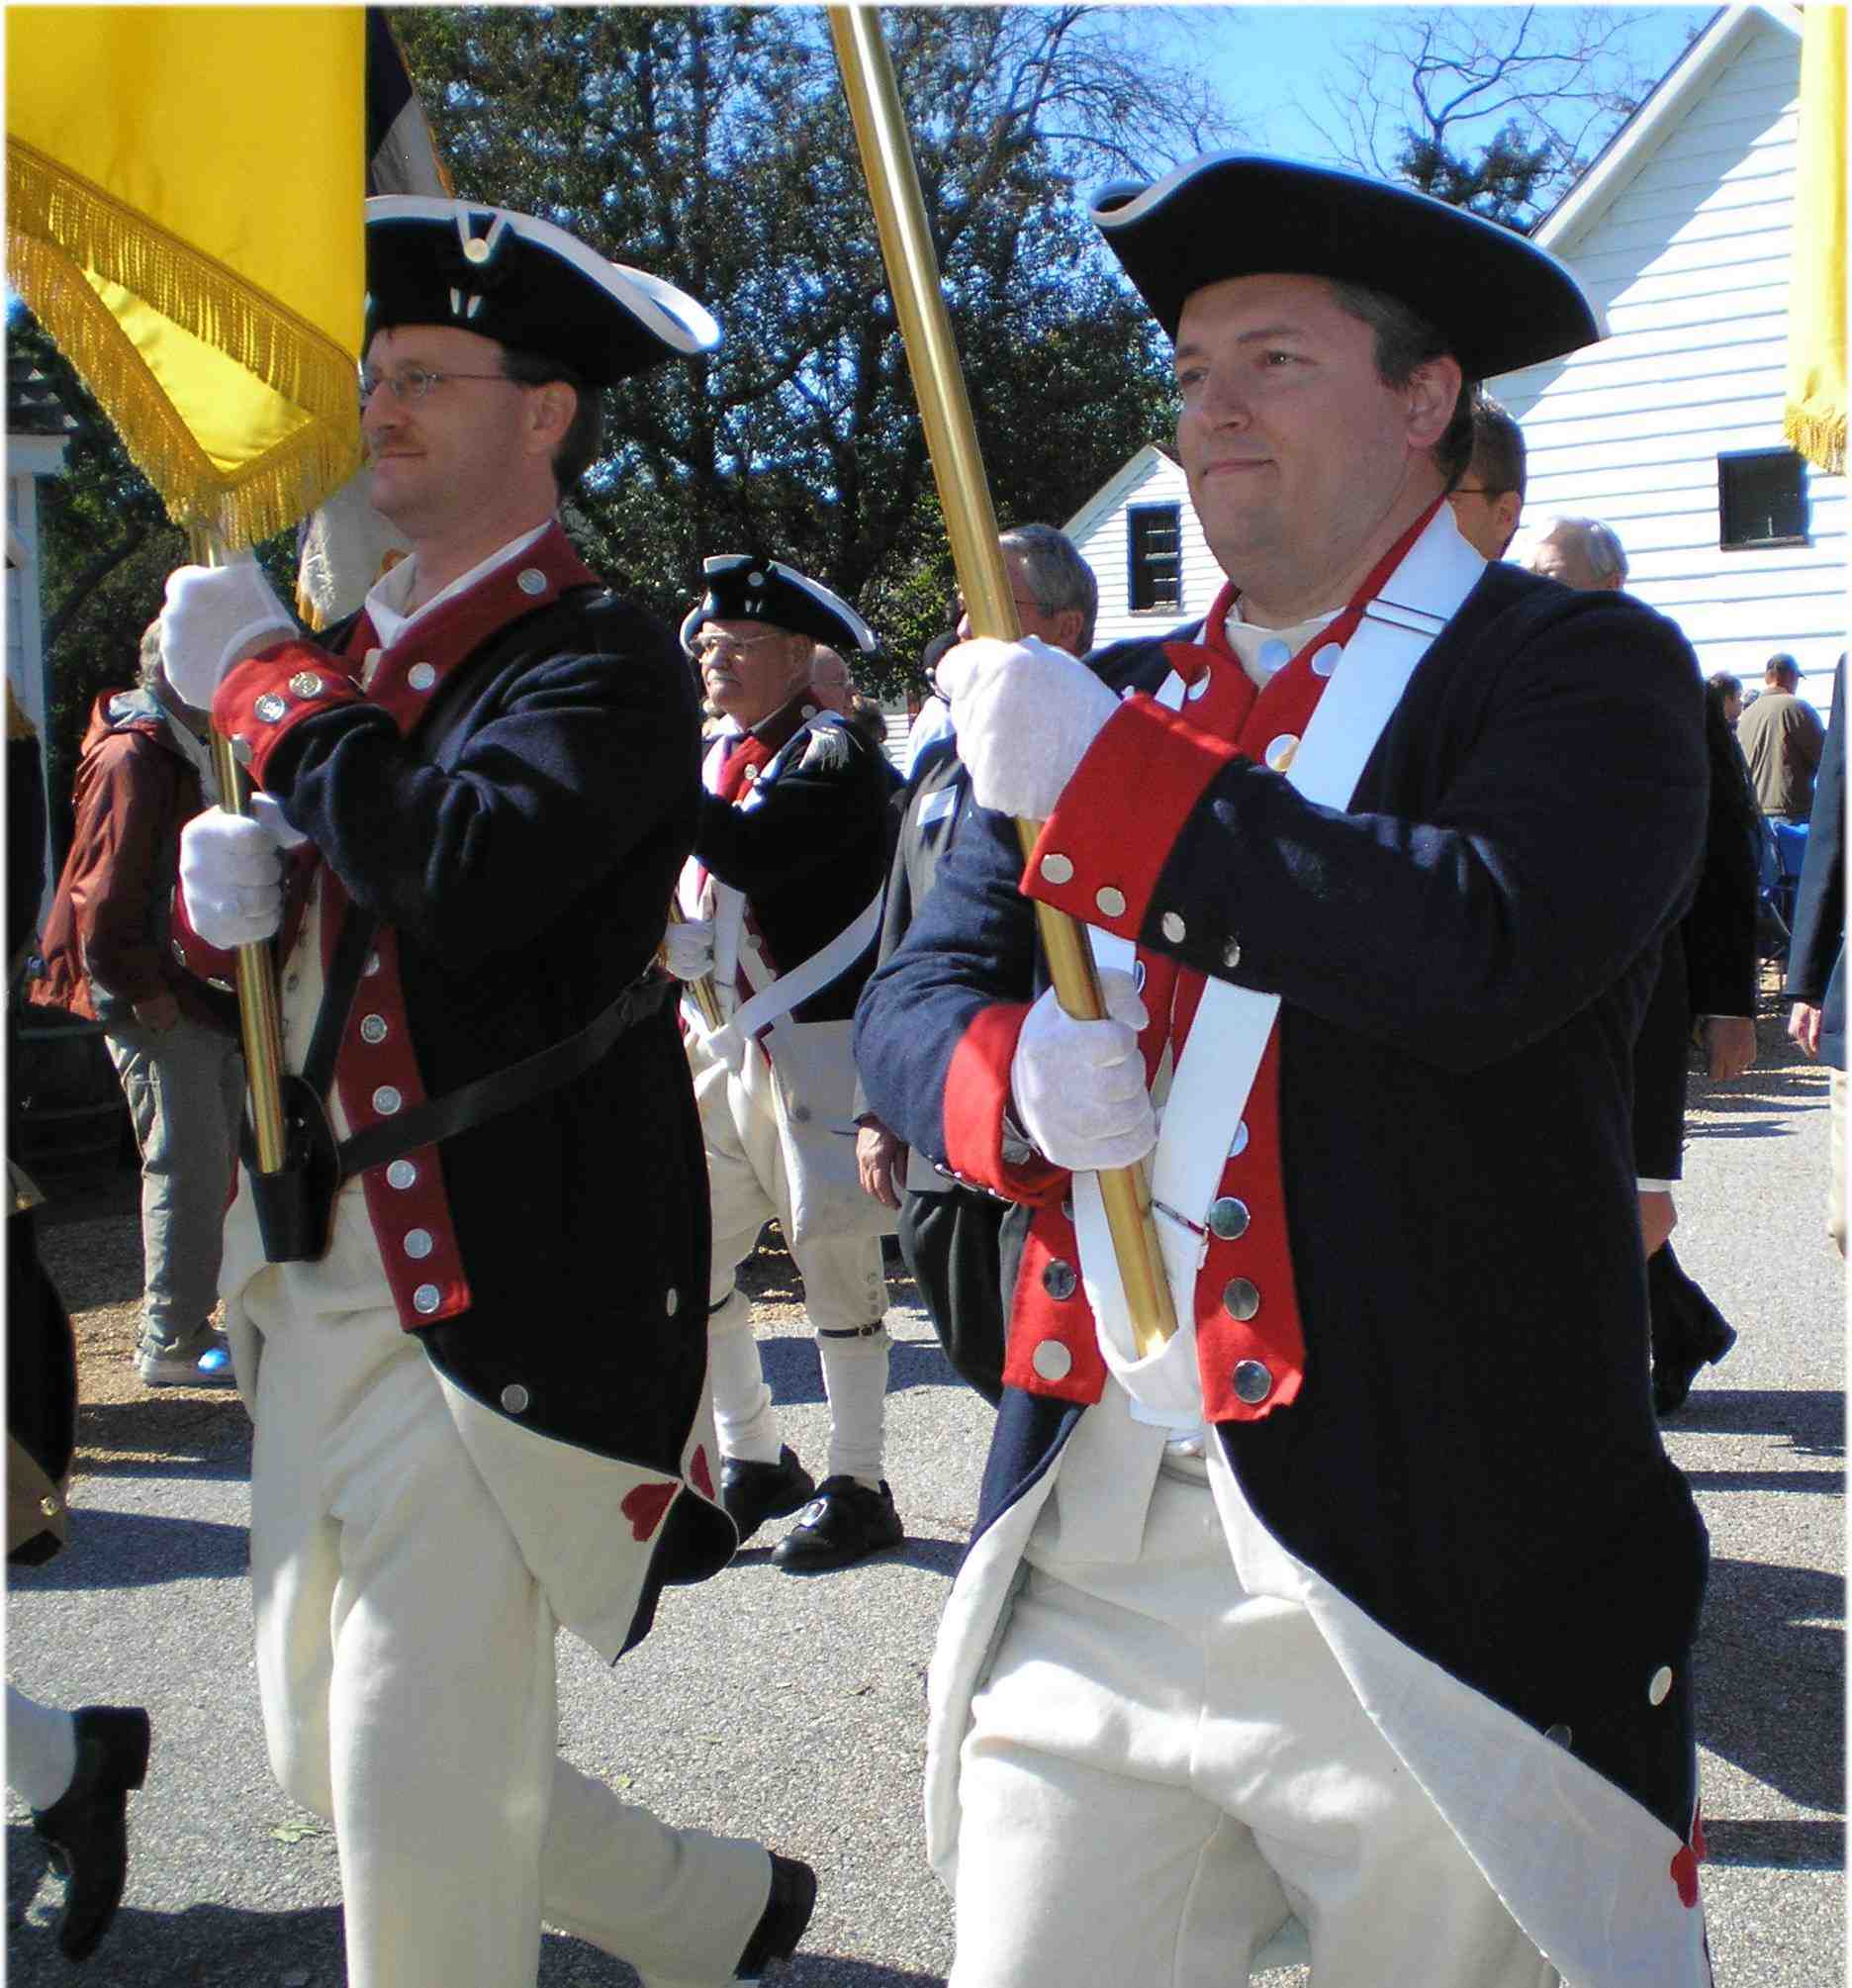 Darrin Schmidt and Dan Rolph marching in Continental Line uniforms.